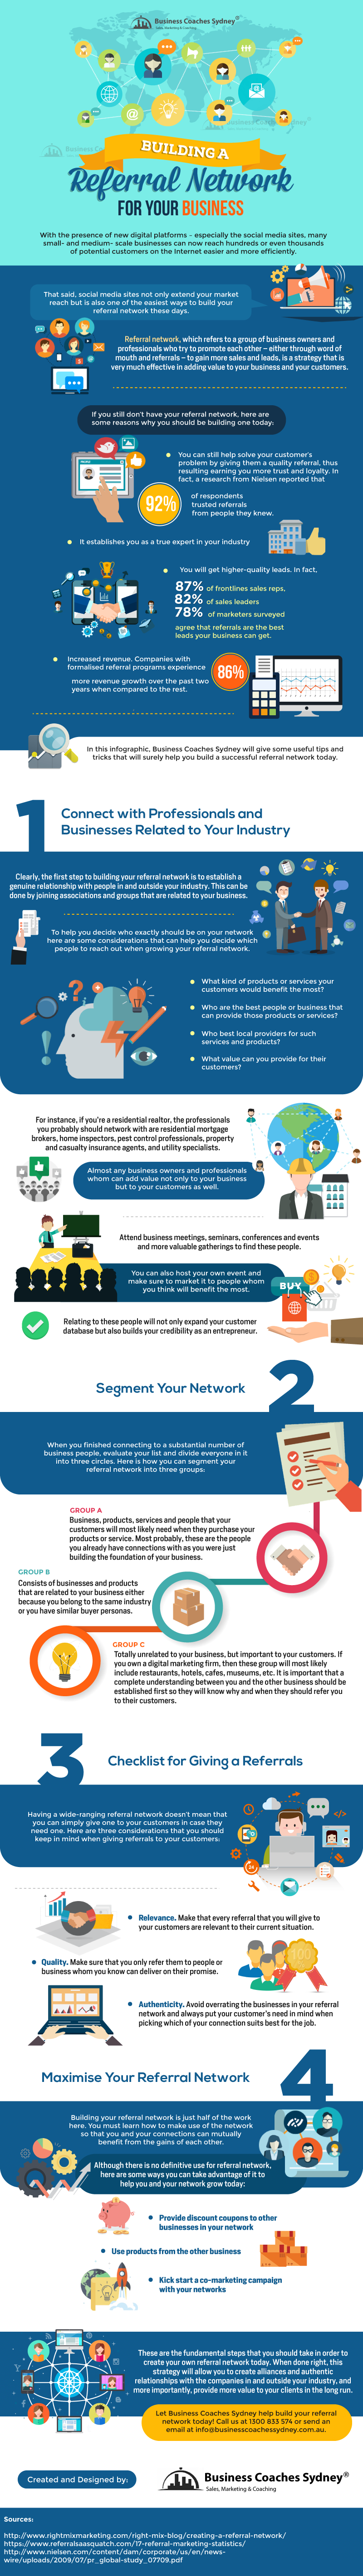 Building A Referral Network for Your Business [Infographic] | Techno FAQ